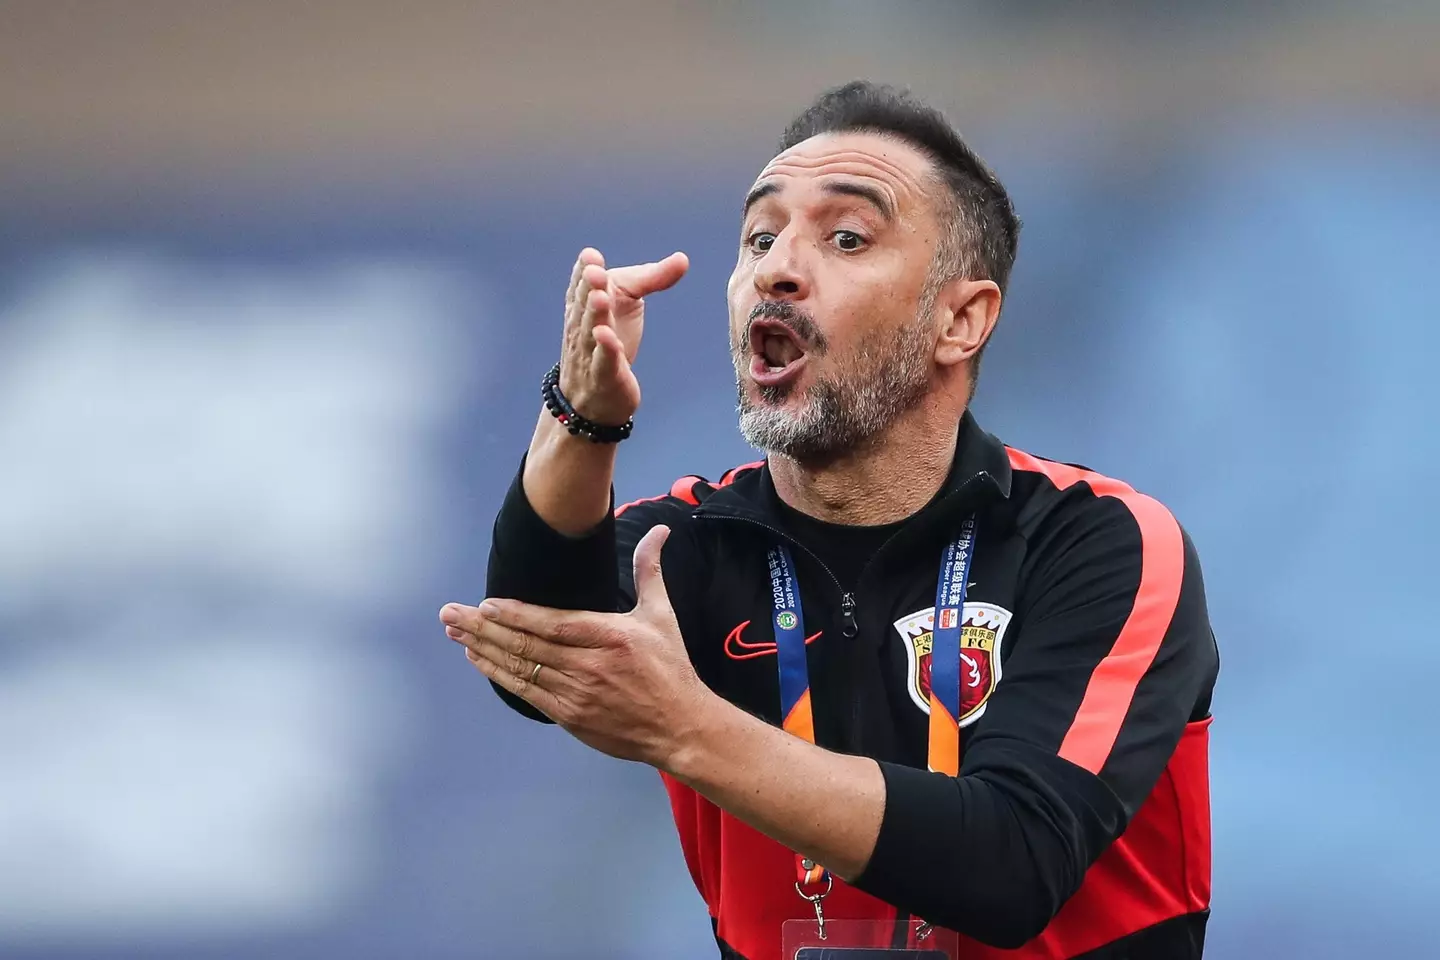 Pereira has won nine trophies over the course of his managerial career (Image: Alamy)